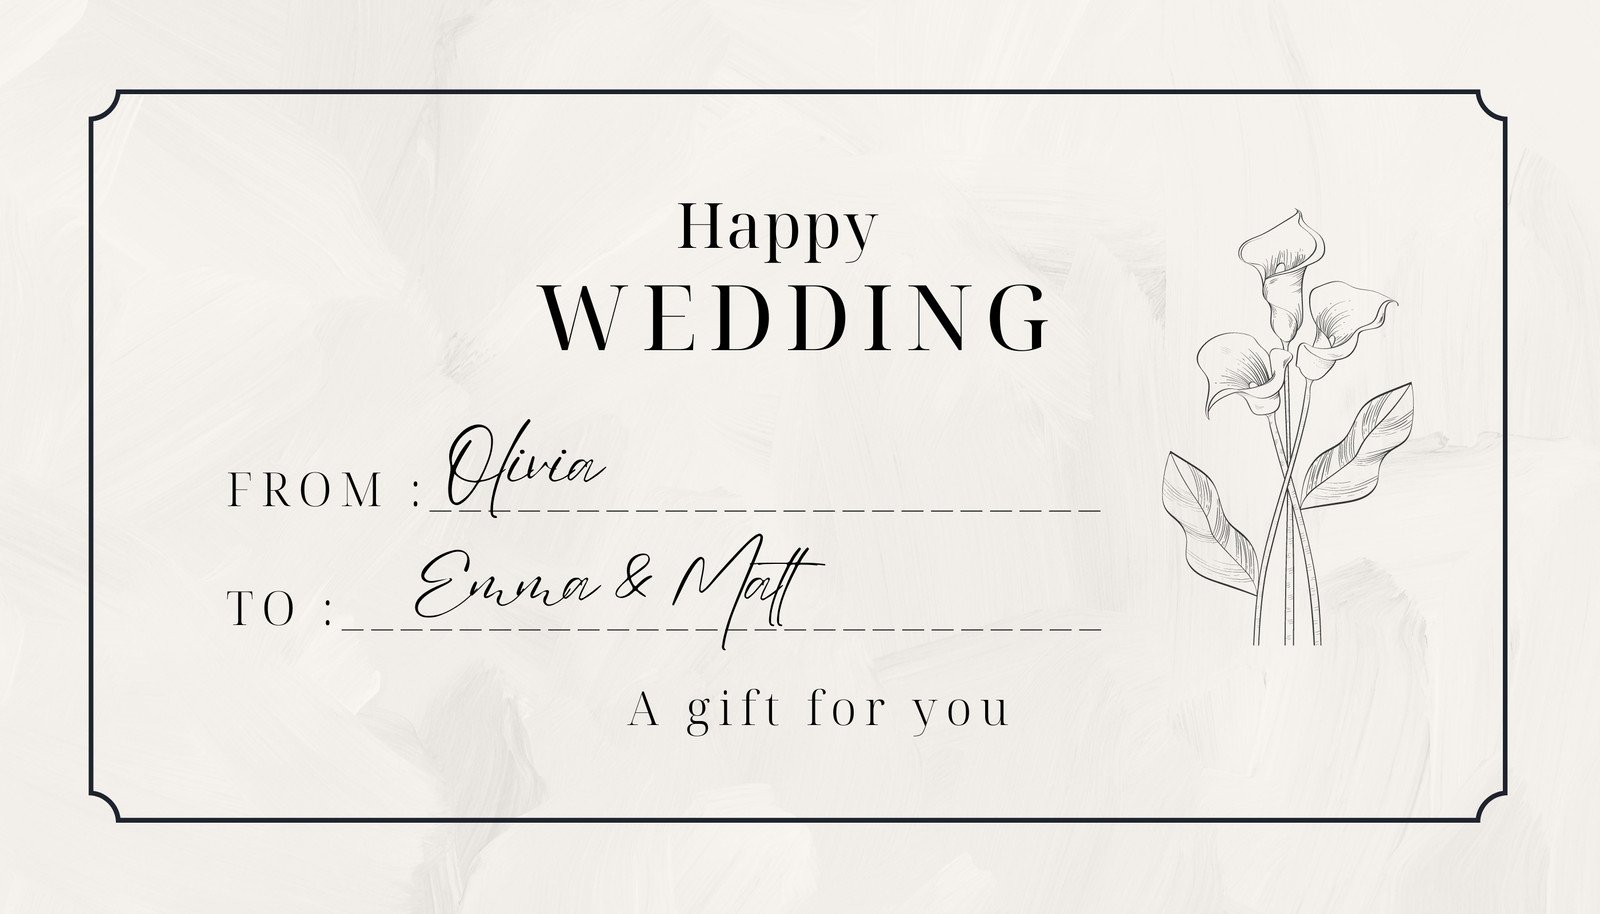 10+ Wedding Gift Card Templates- MS Word, Photoshop, Illustrator,  Publisher, Apple Pages